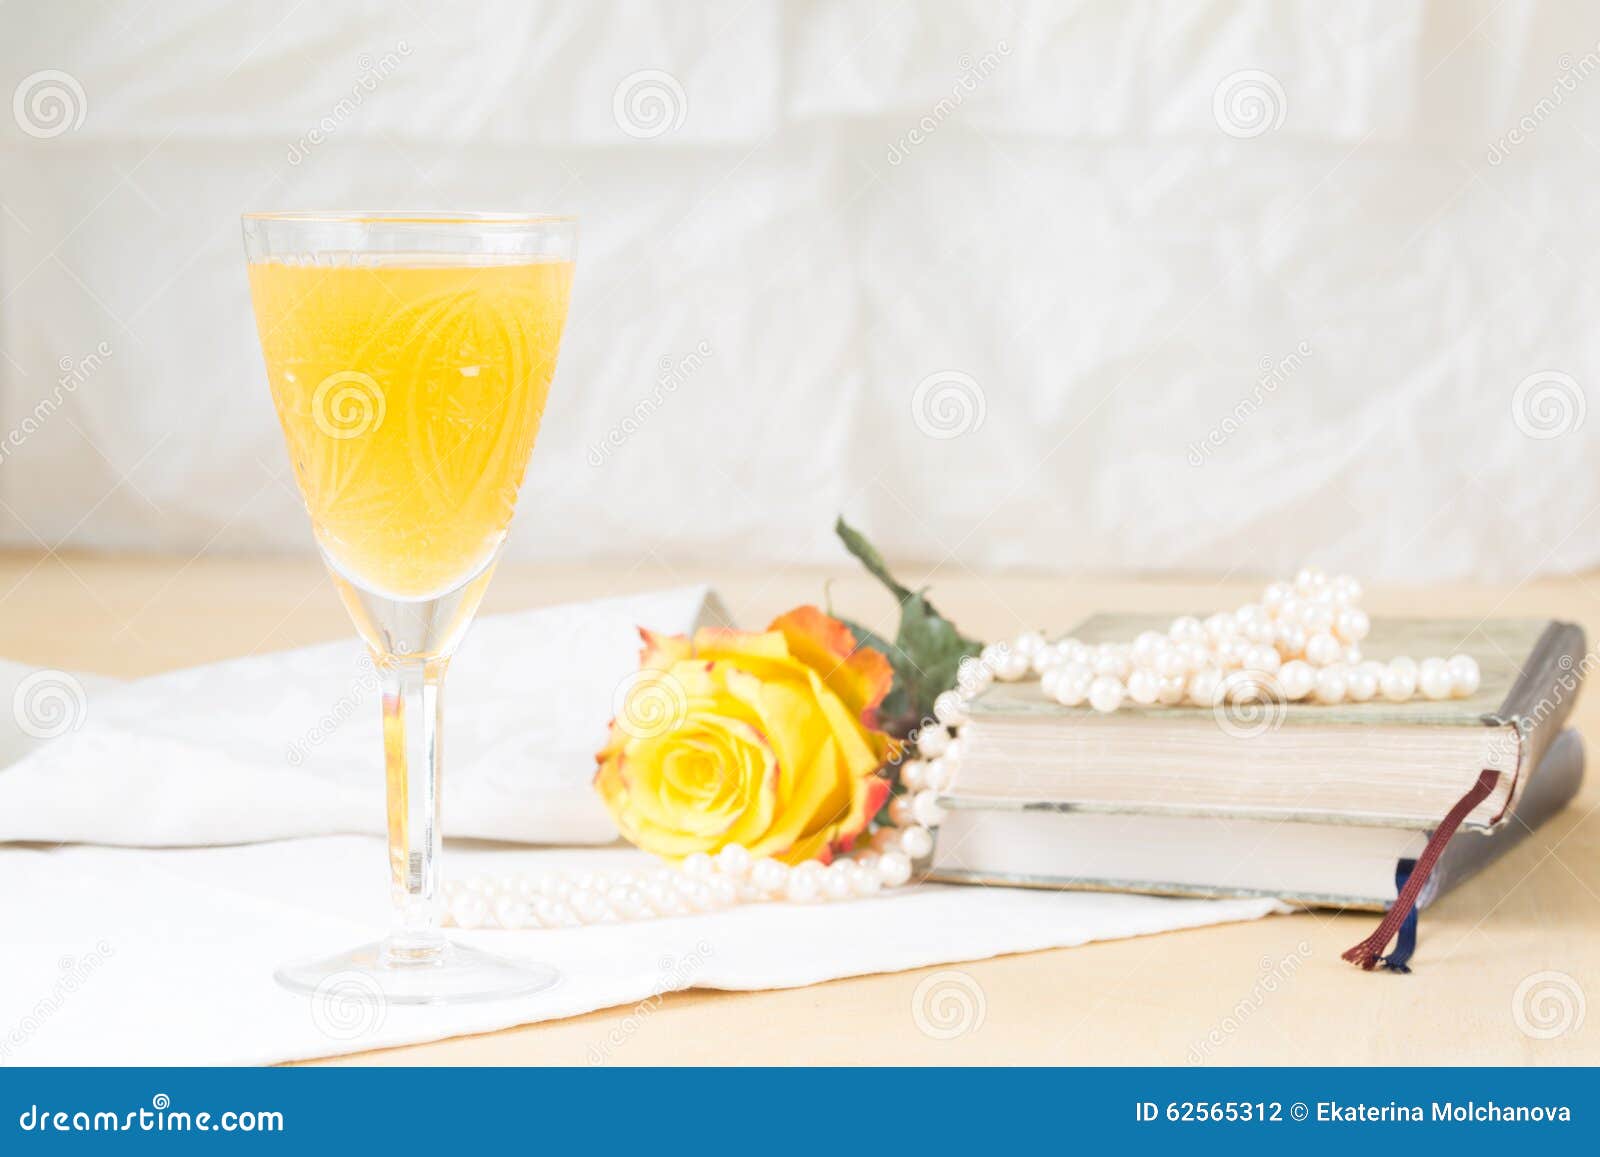 https://thumbs.dreamstime.com/z/glass-mimosa-cocktail-vintage-books-pearls-lightweight-background-style-horizontal-62565312.jpg